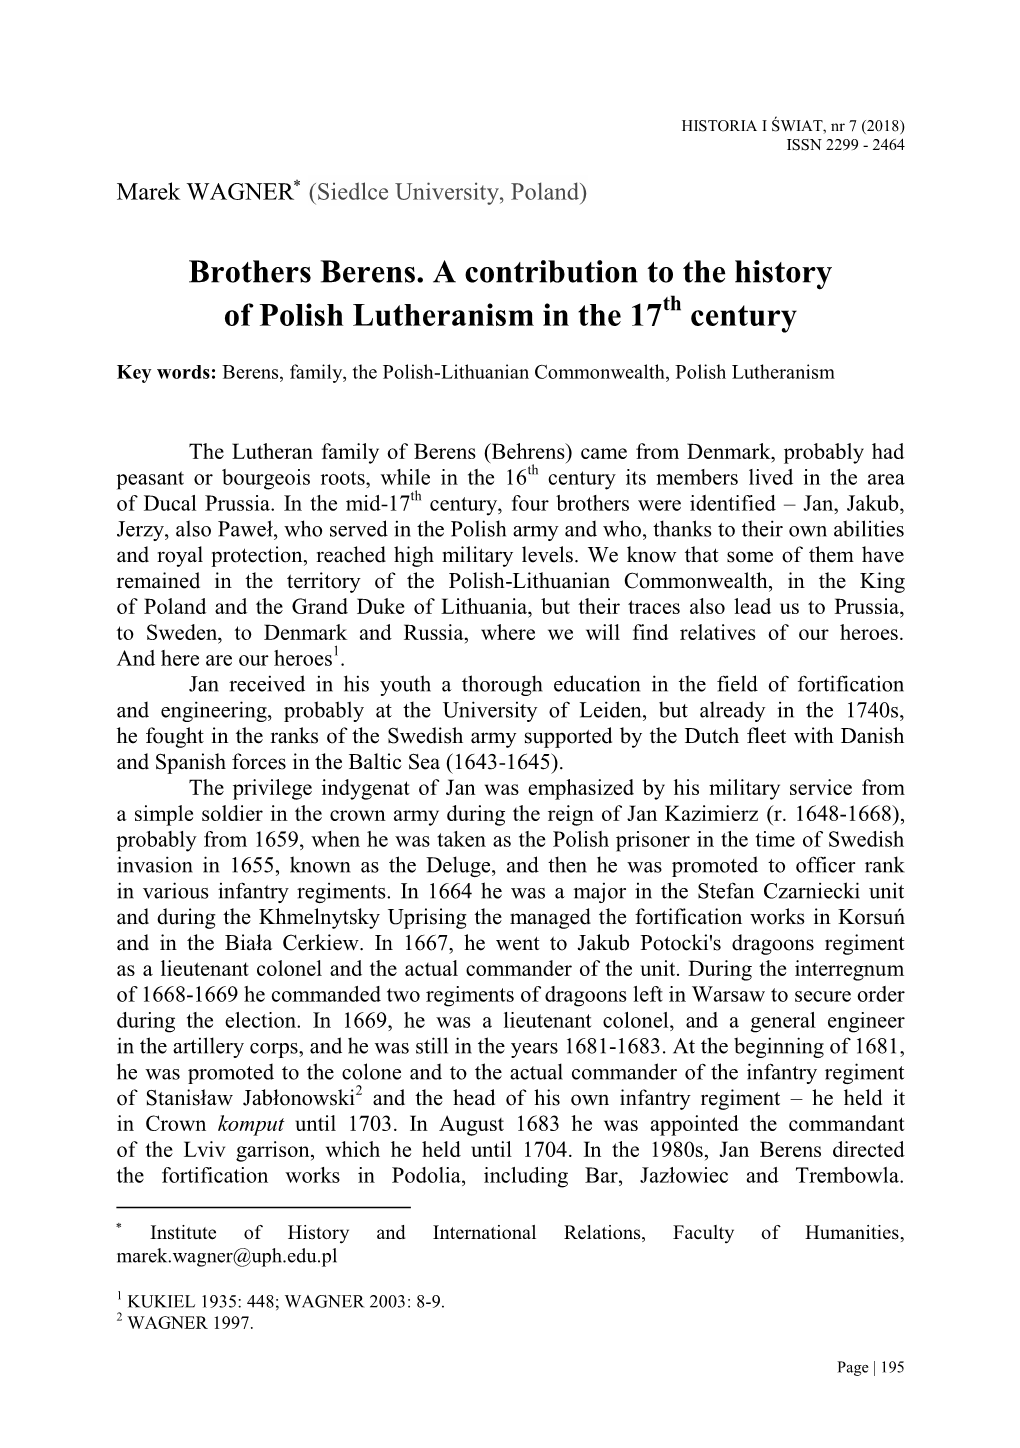 Brothers Berens. a Contribution to the History of Polish Lutheranism in the 17Th Century